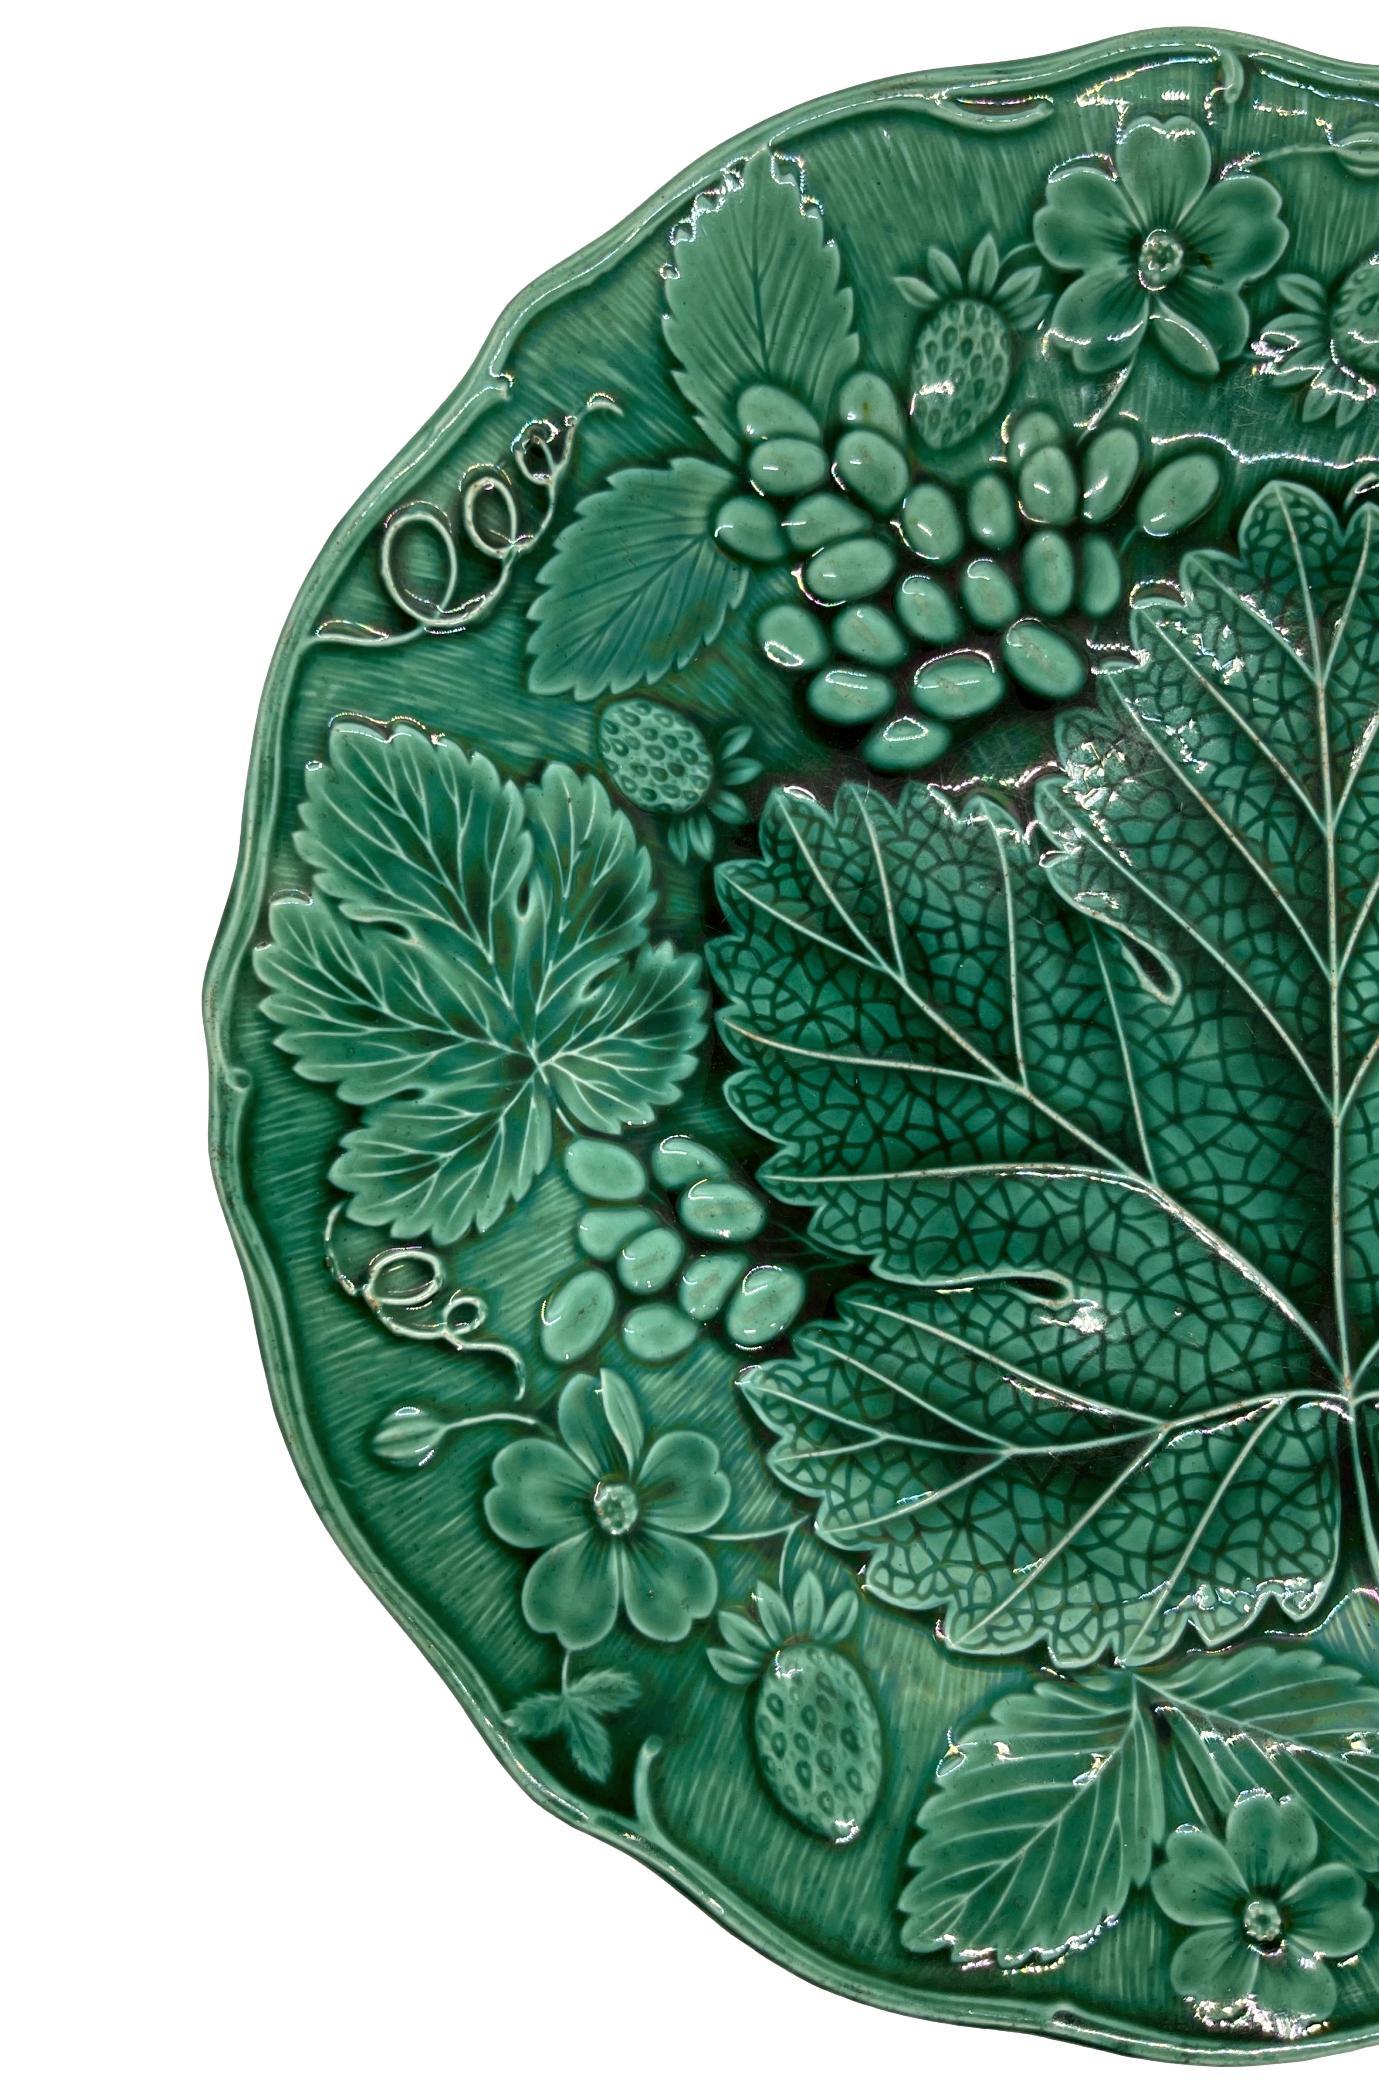 Green Majolica dessert plate, molded with strawberries and grapes, English, ca. 1880.